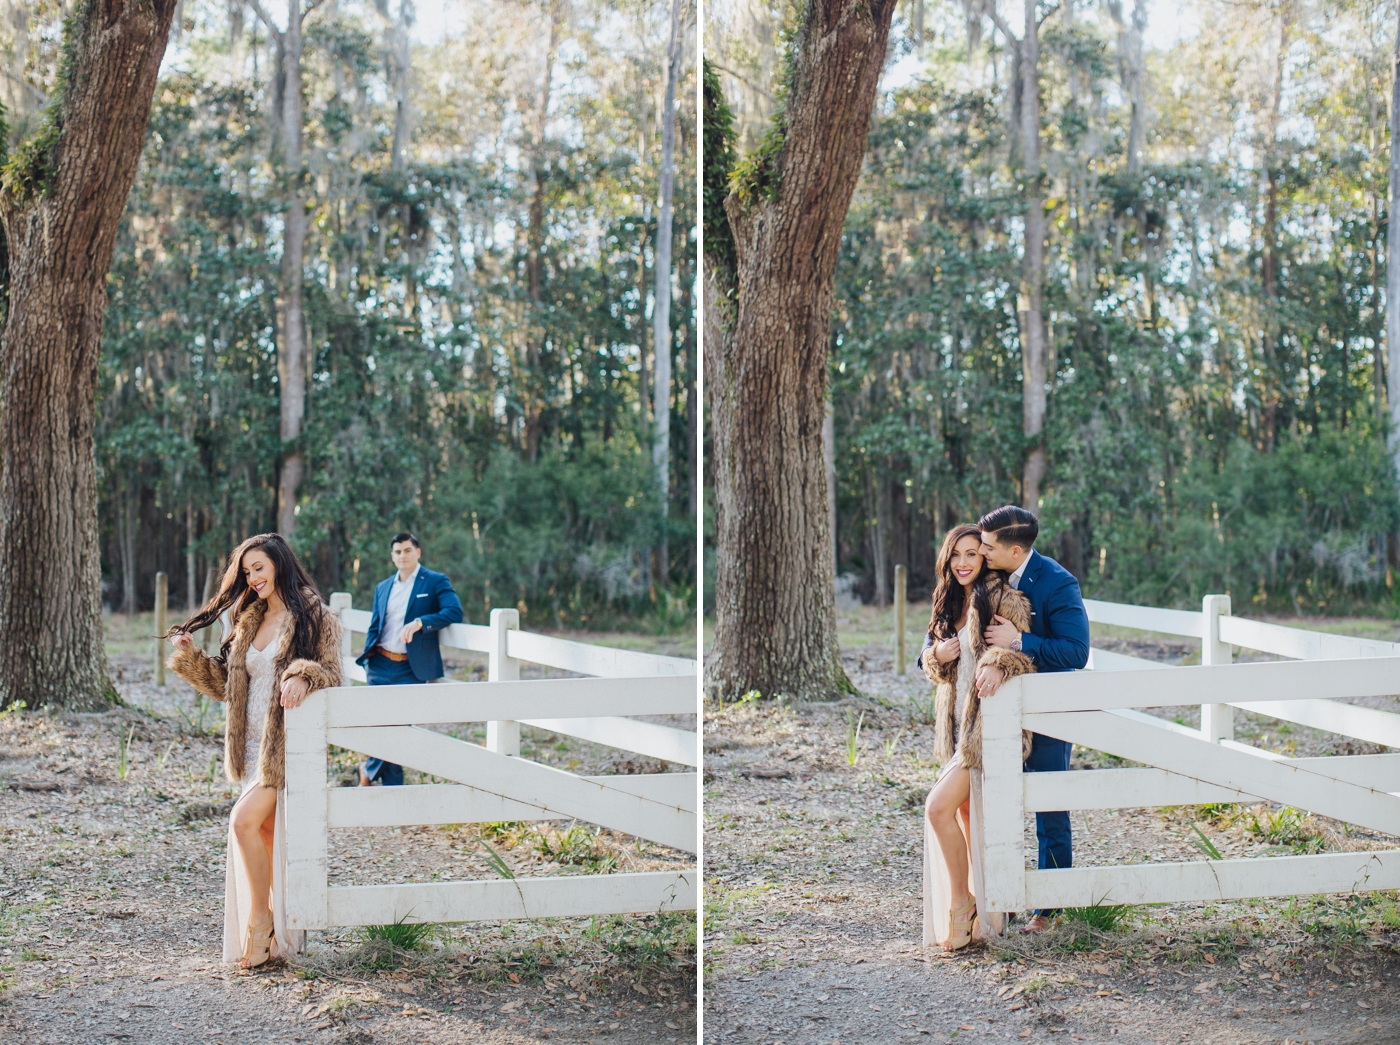 Carly and Colin’s Wormsloe engagement session by Izzy Hudgins Photography